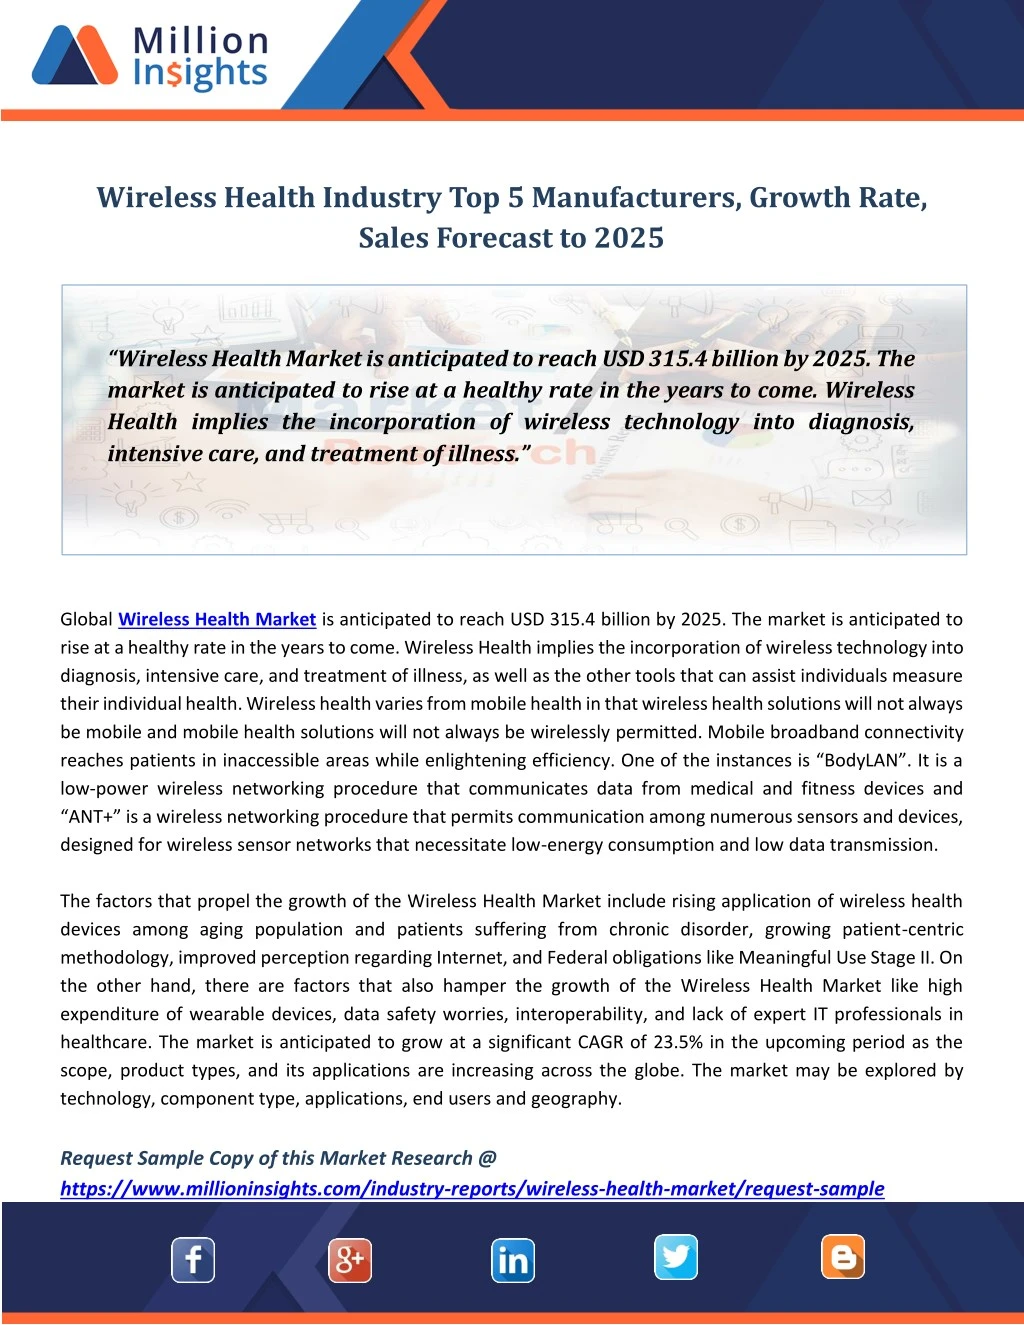 wireless health industry top 5 manufacturers